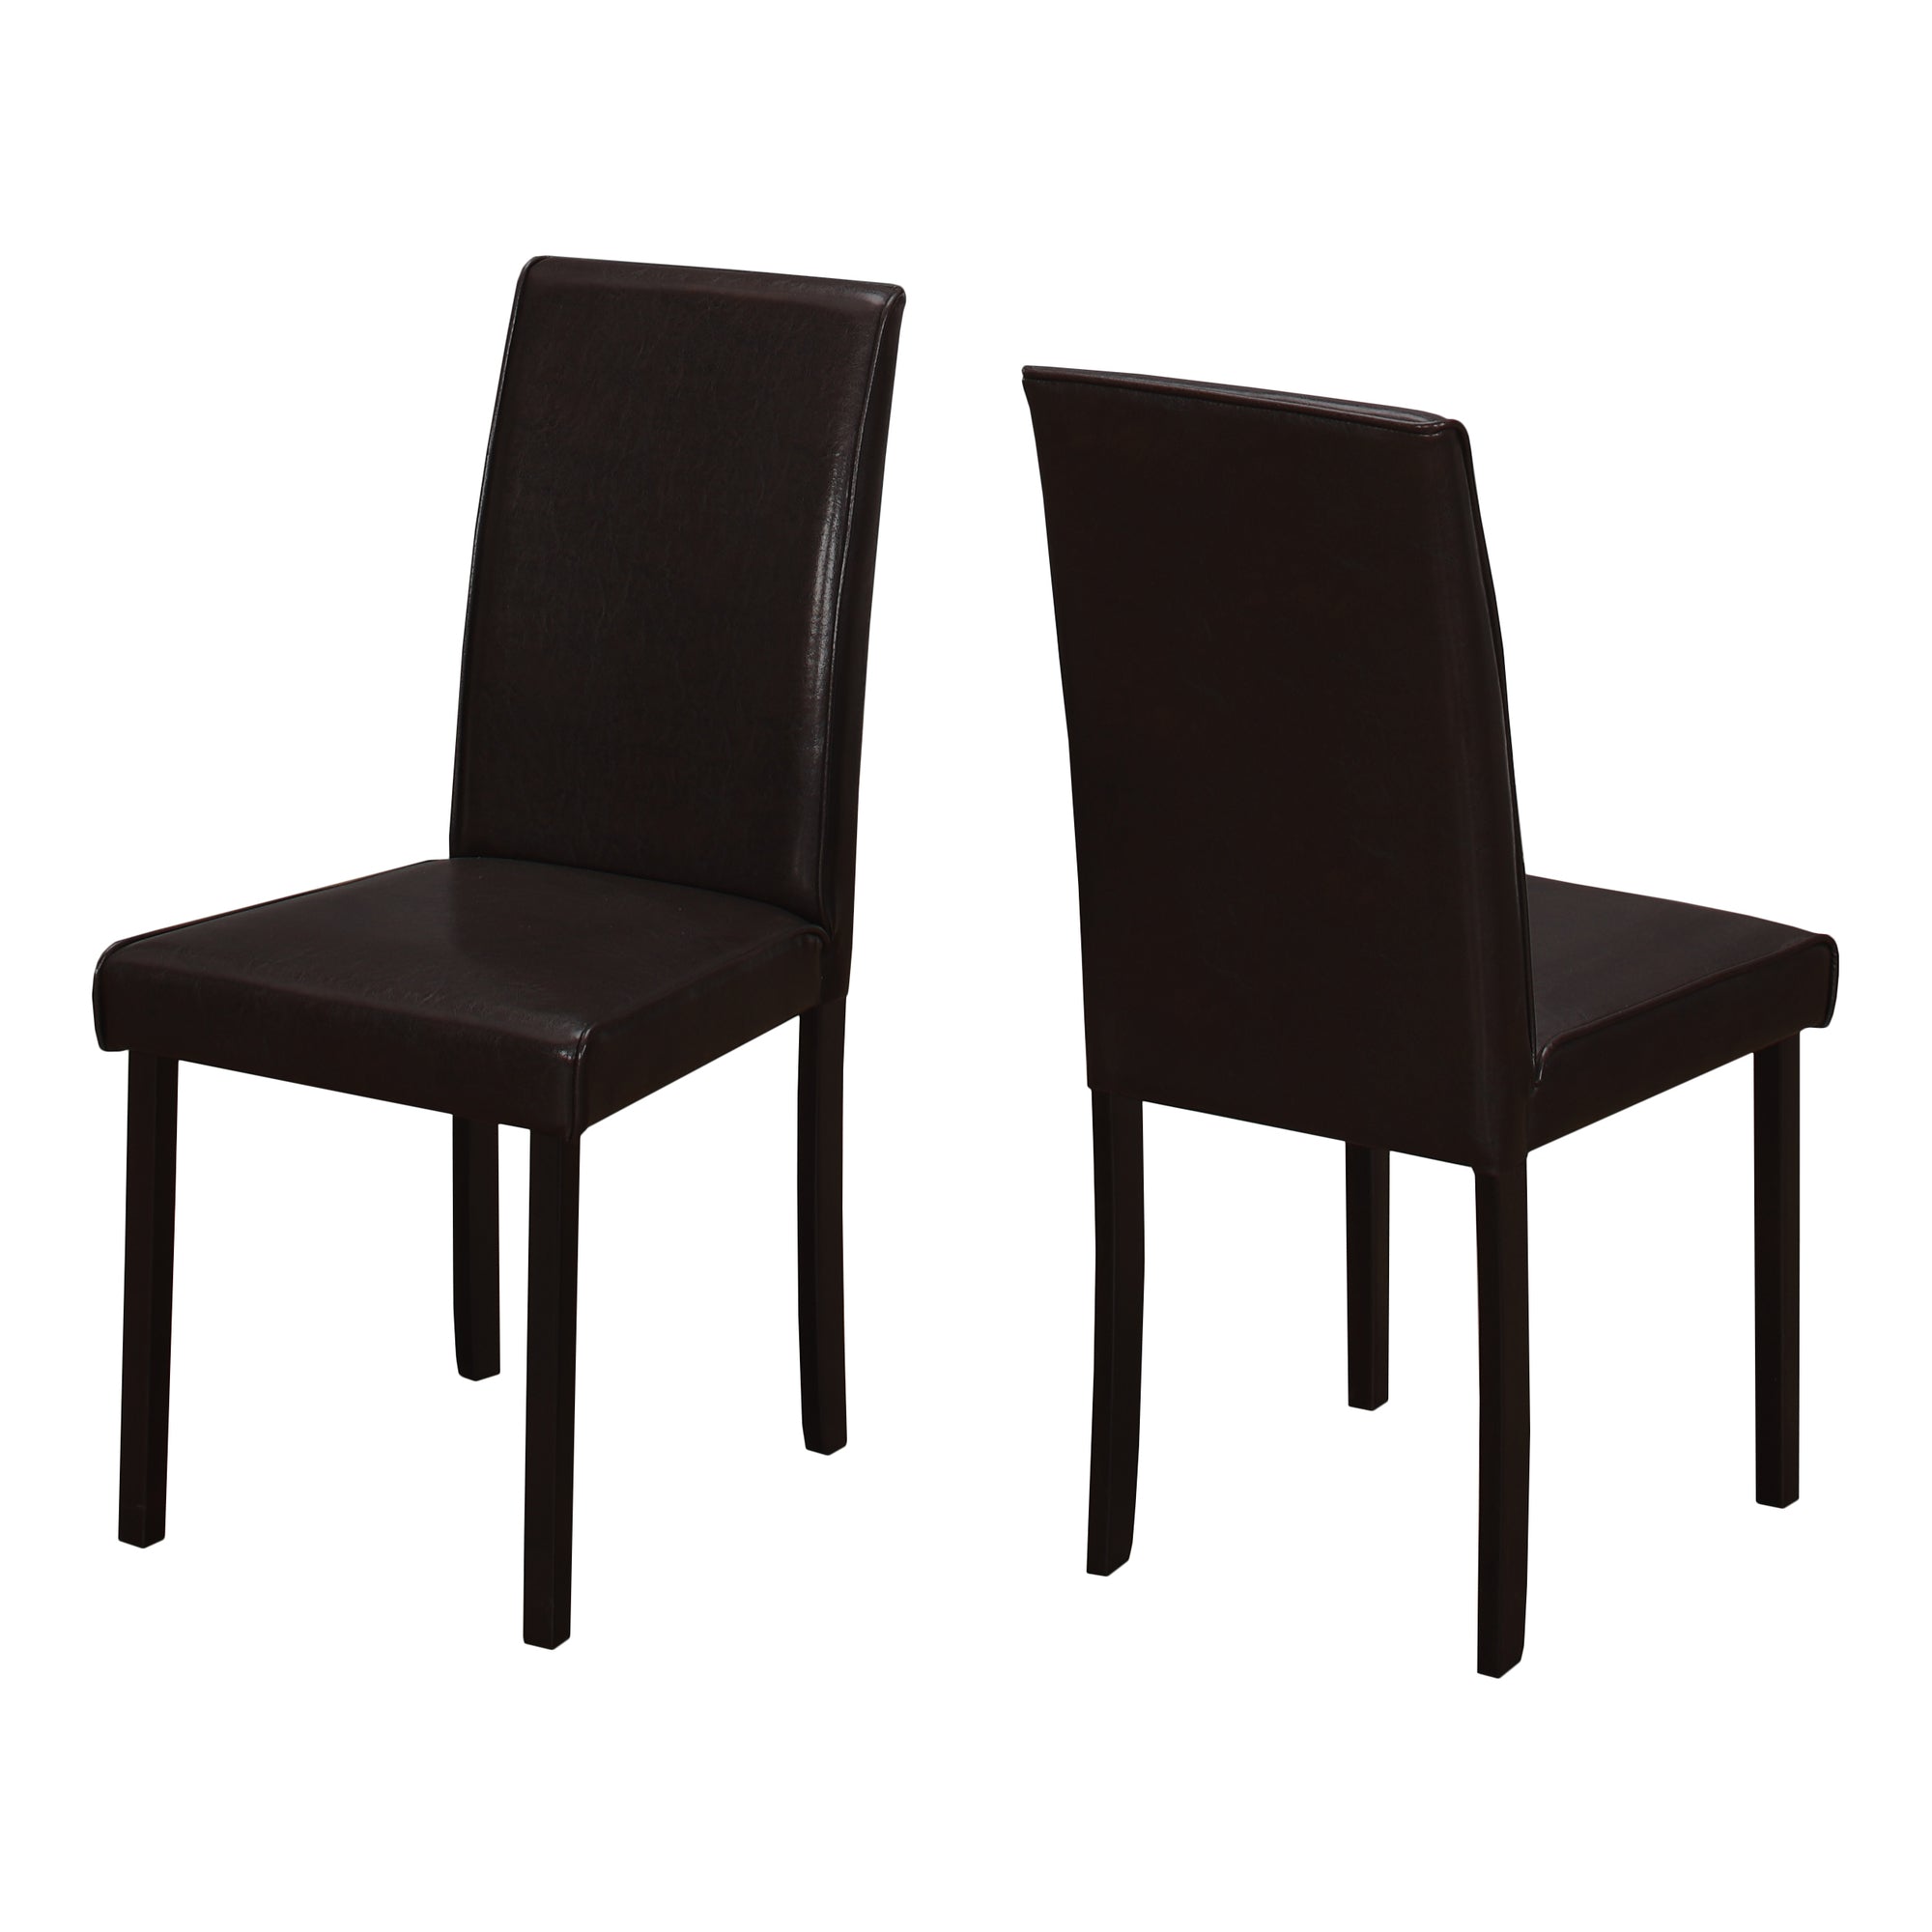 Afford High-Back Leather-Look Dining Chair (Set of 2 - Dark Brown)